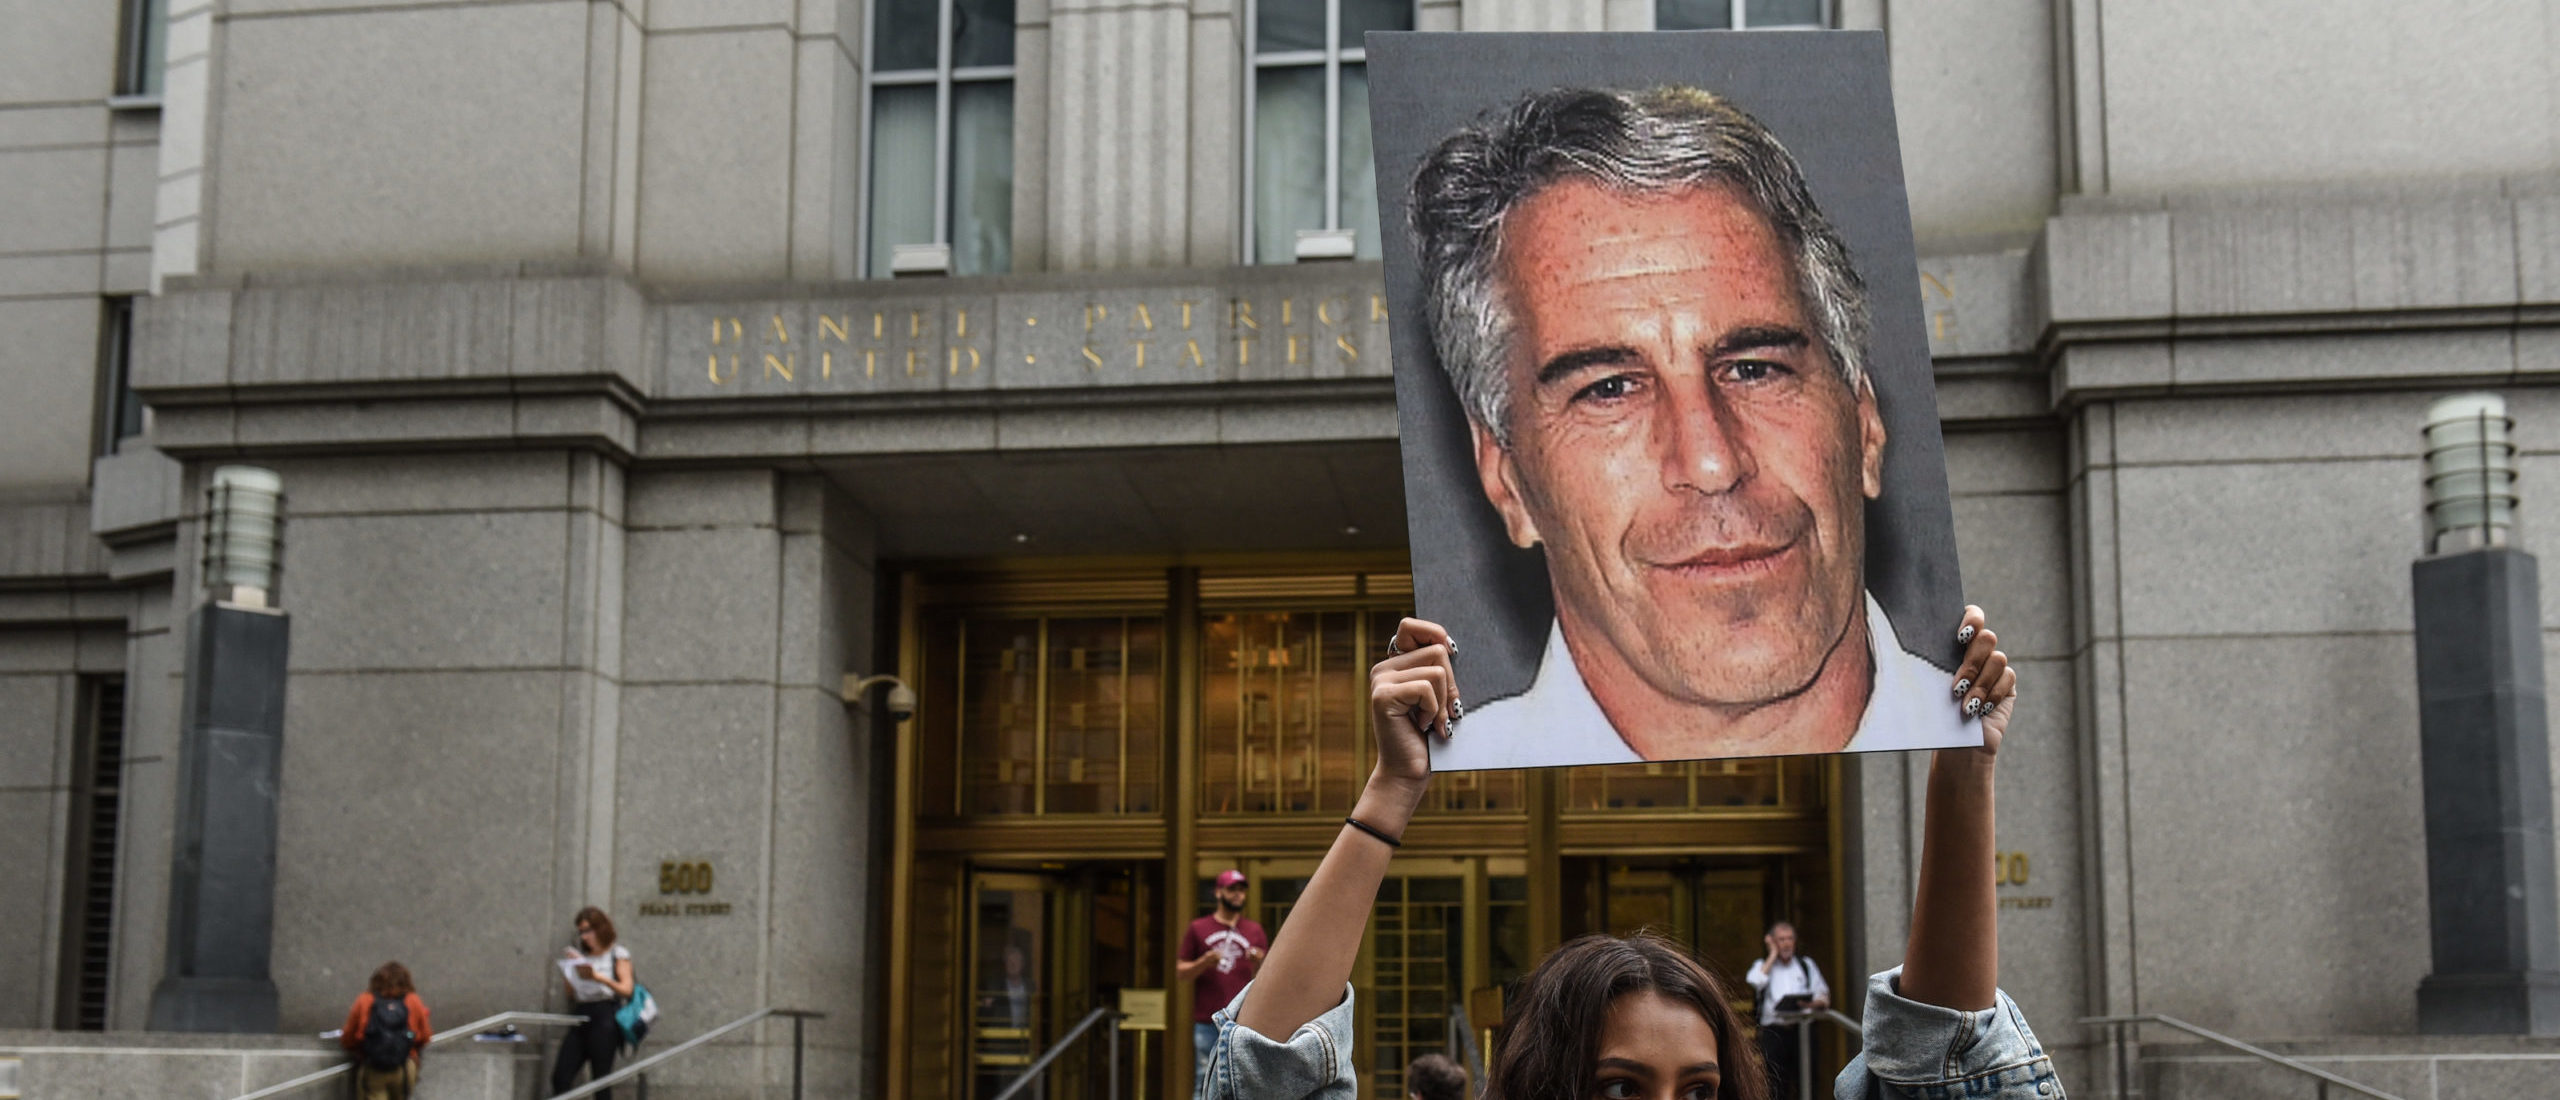 Jeffrey Epstein S Sex Trafficking Operation Was Allegedly Aided By Former Us Virgin Islands